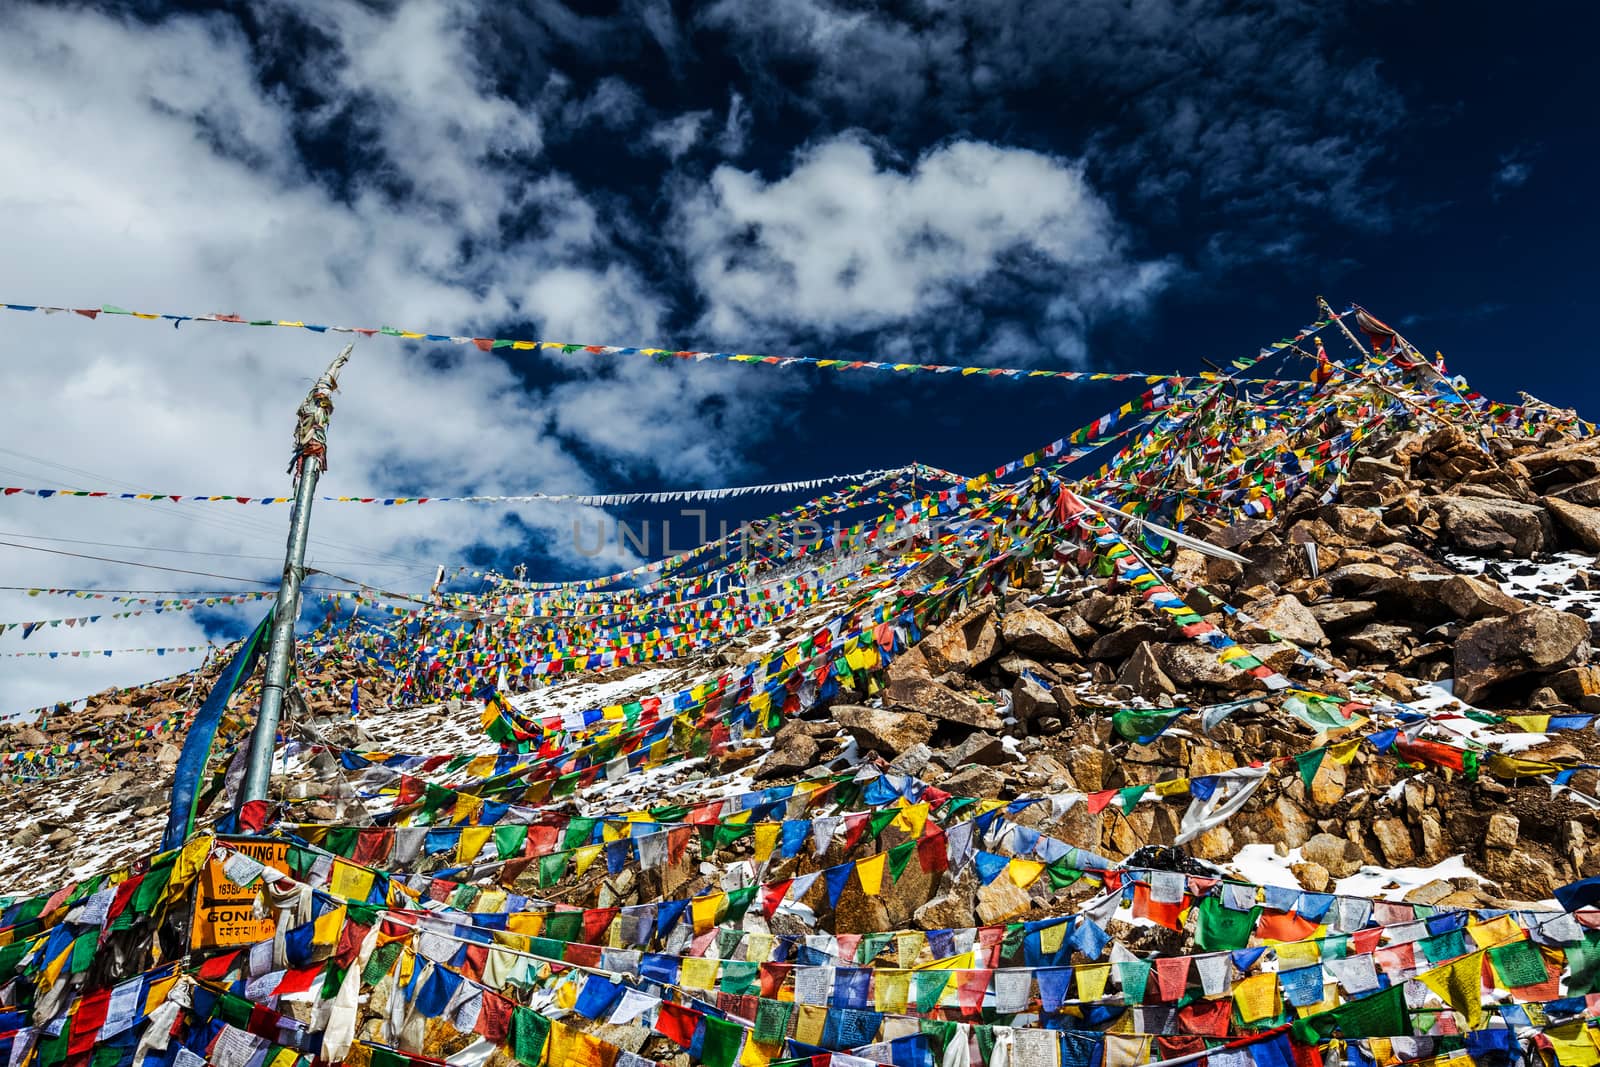 Tibetan prayer flags of Buddhism with Buddhist mantra on it on top of Himalayan pass Khardung La. It's the highest motorable pass in the world 5602m. On the way from Leh to Nubra valley. Ladakh, India